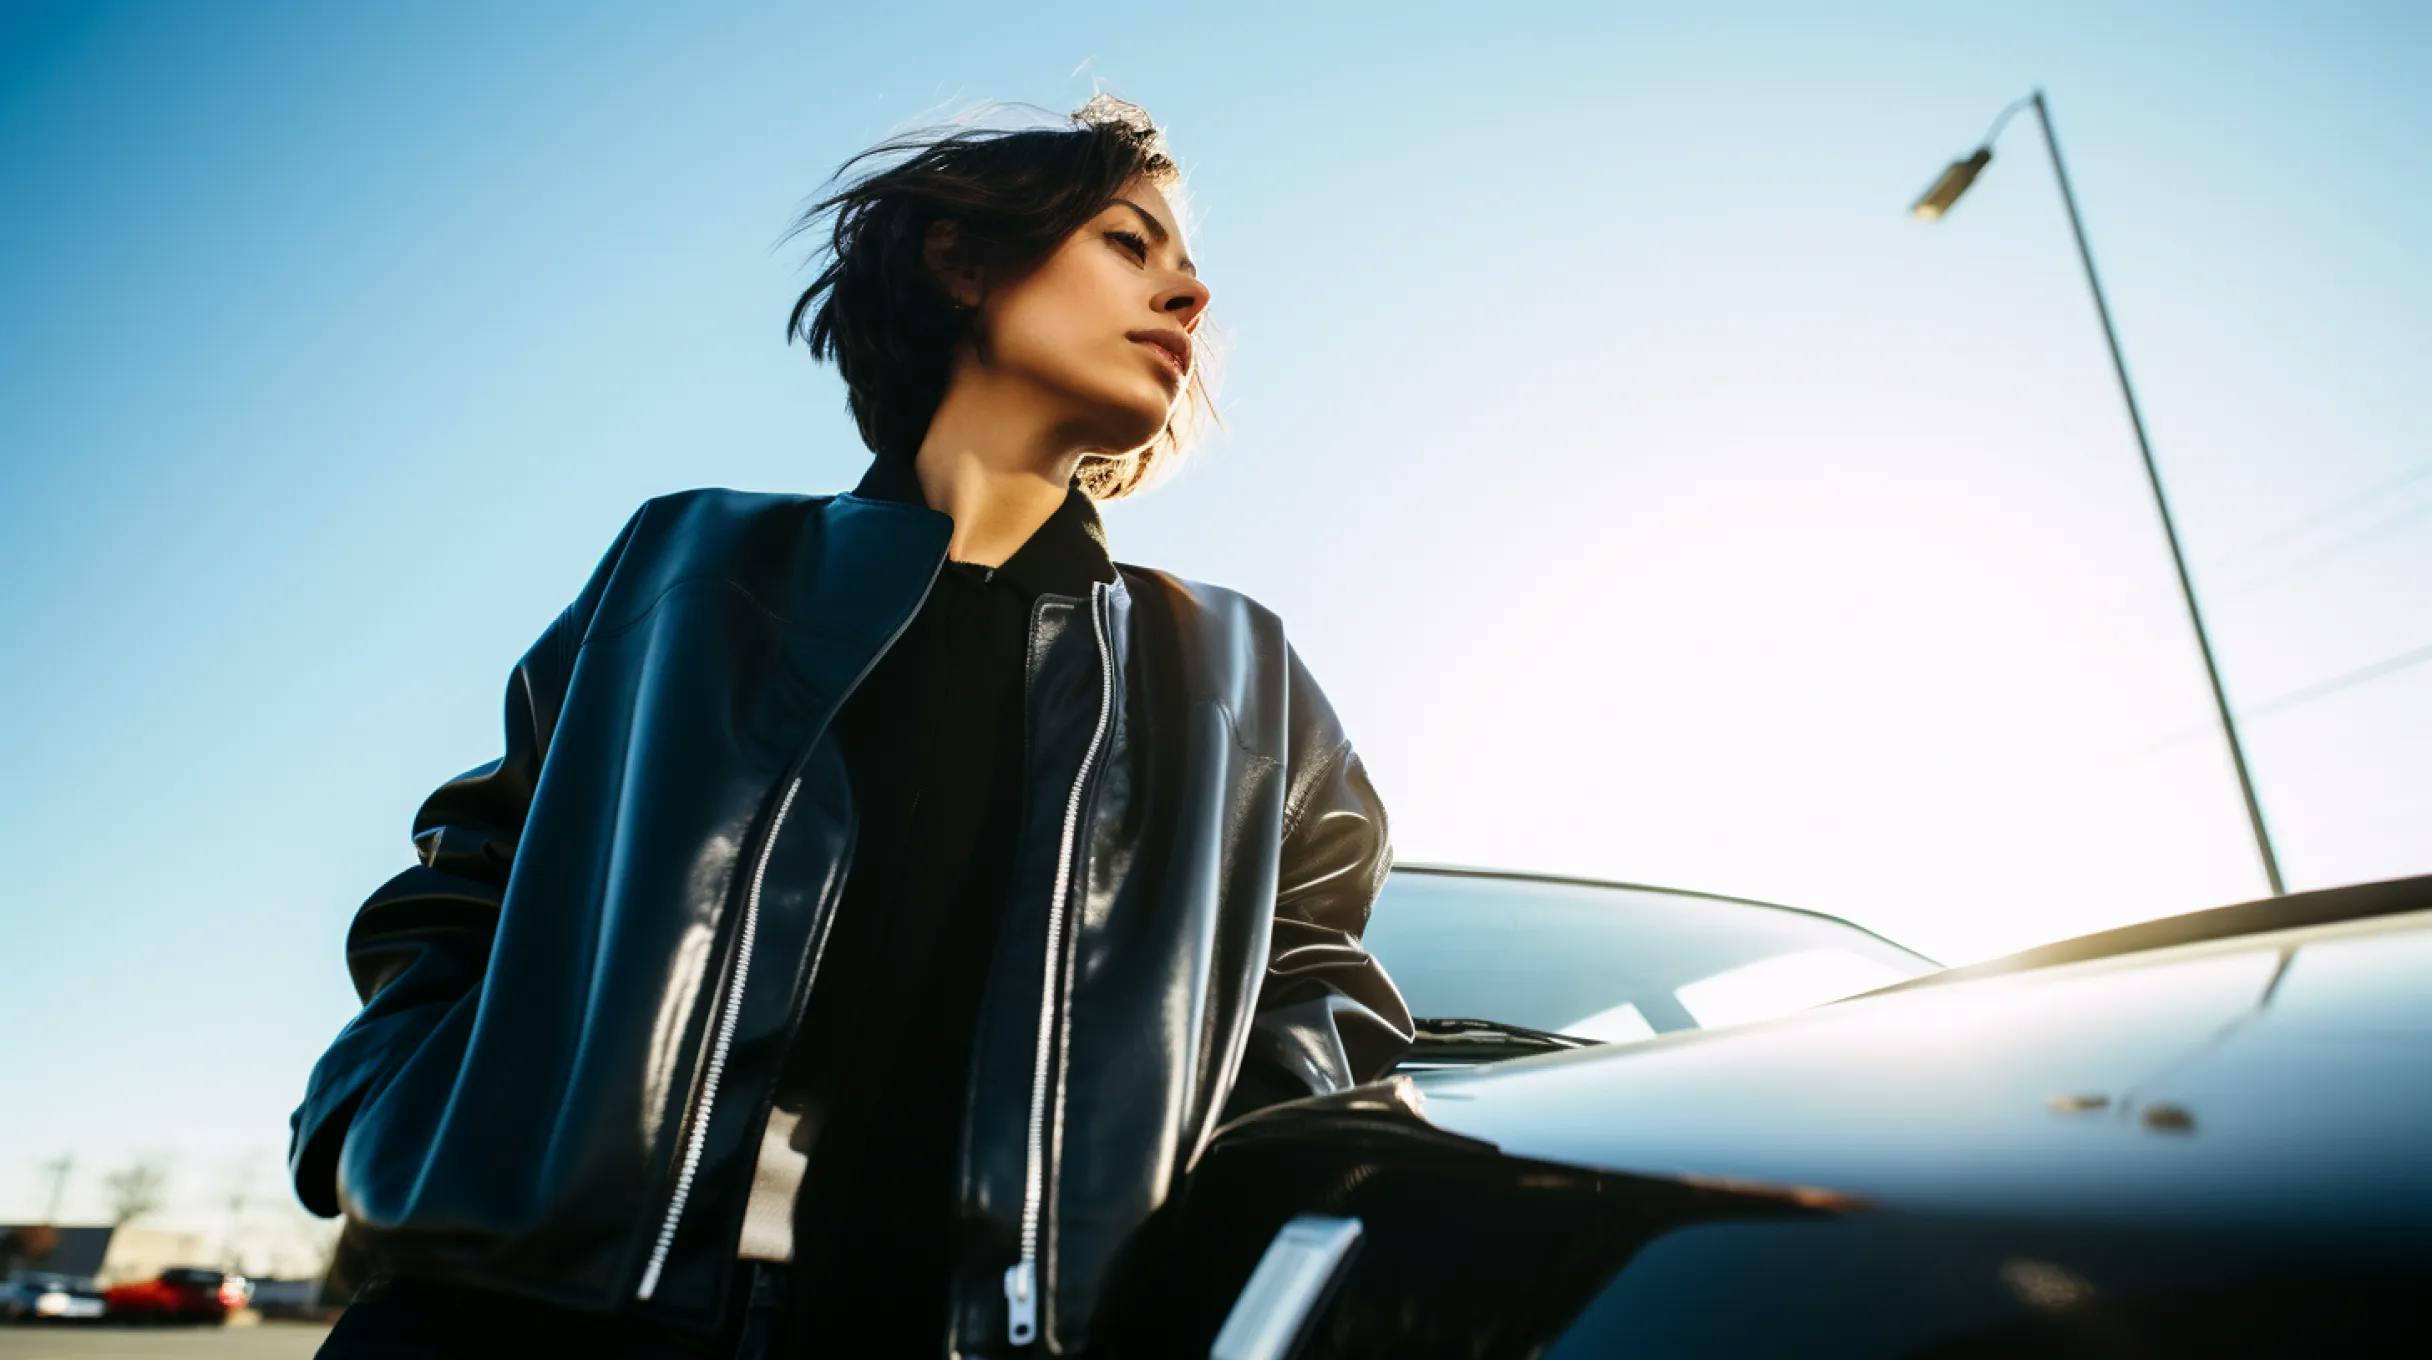 A woman in a leather jacket standing next to a car.